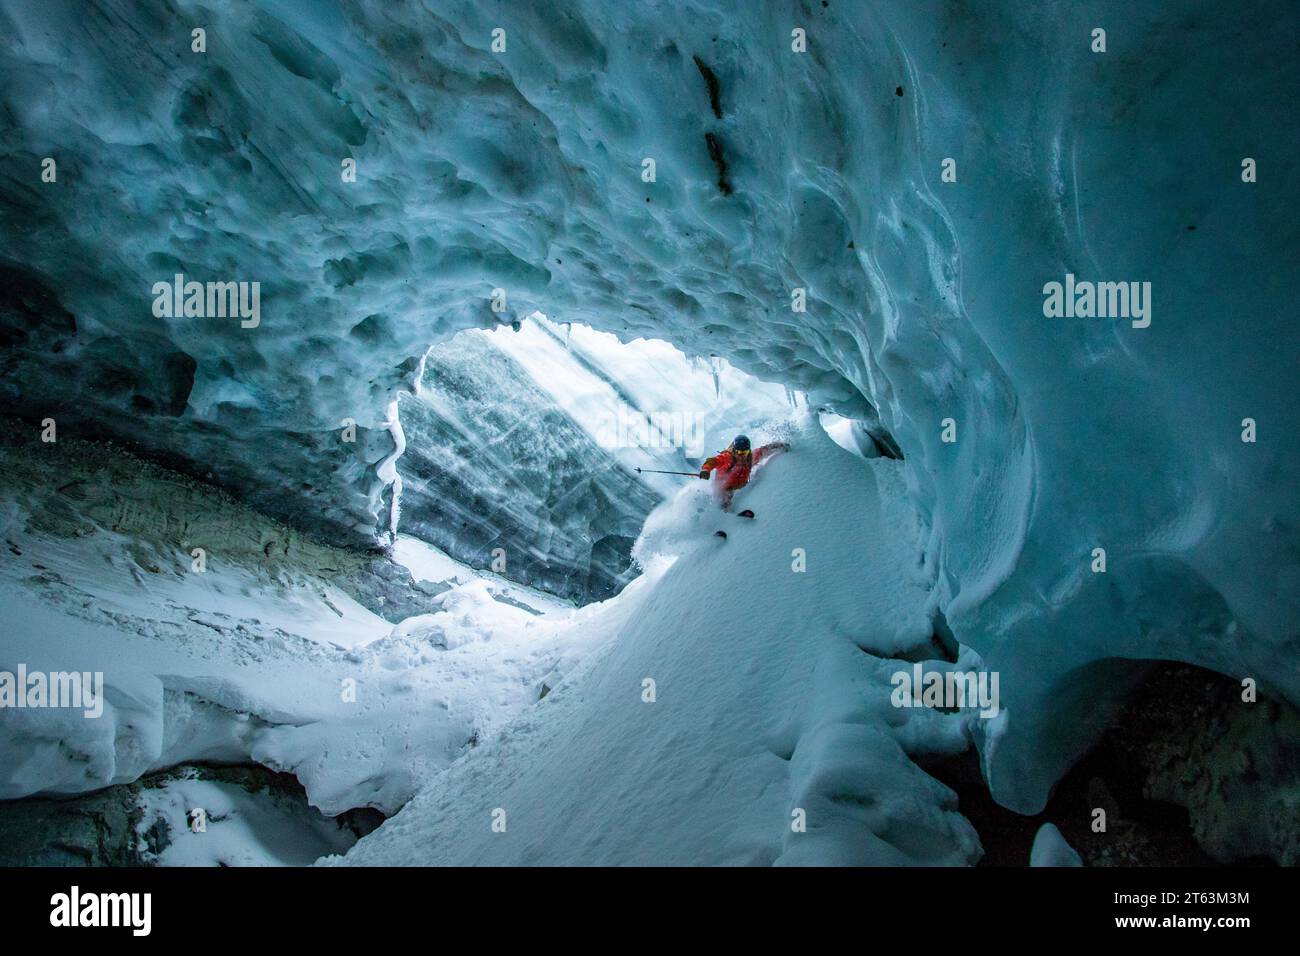 Unrecognizable skier in warm suit skiing on slope in cave at snowy mountain during vacation at Swiss Alps Stock Photo